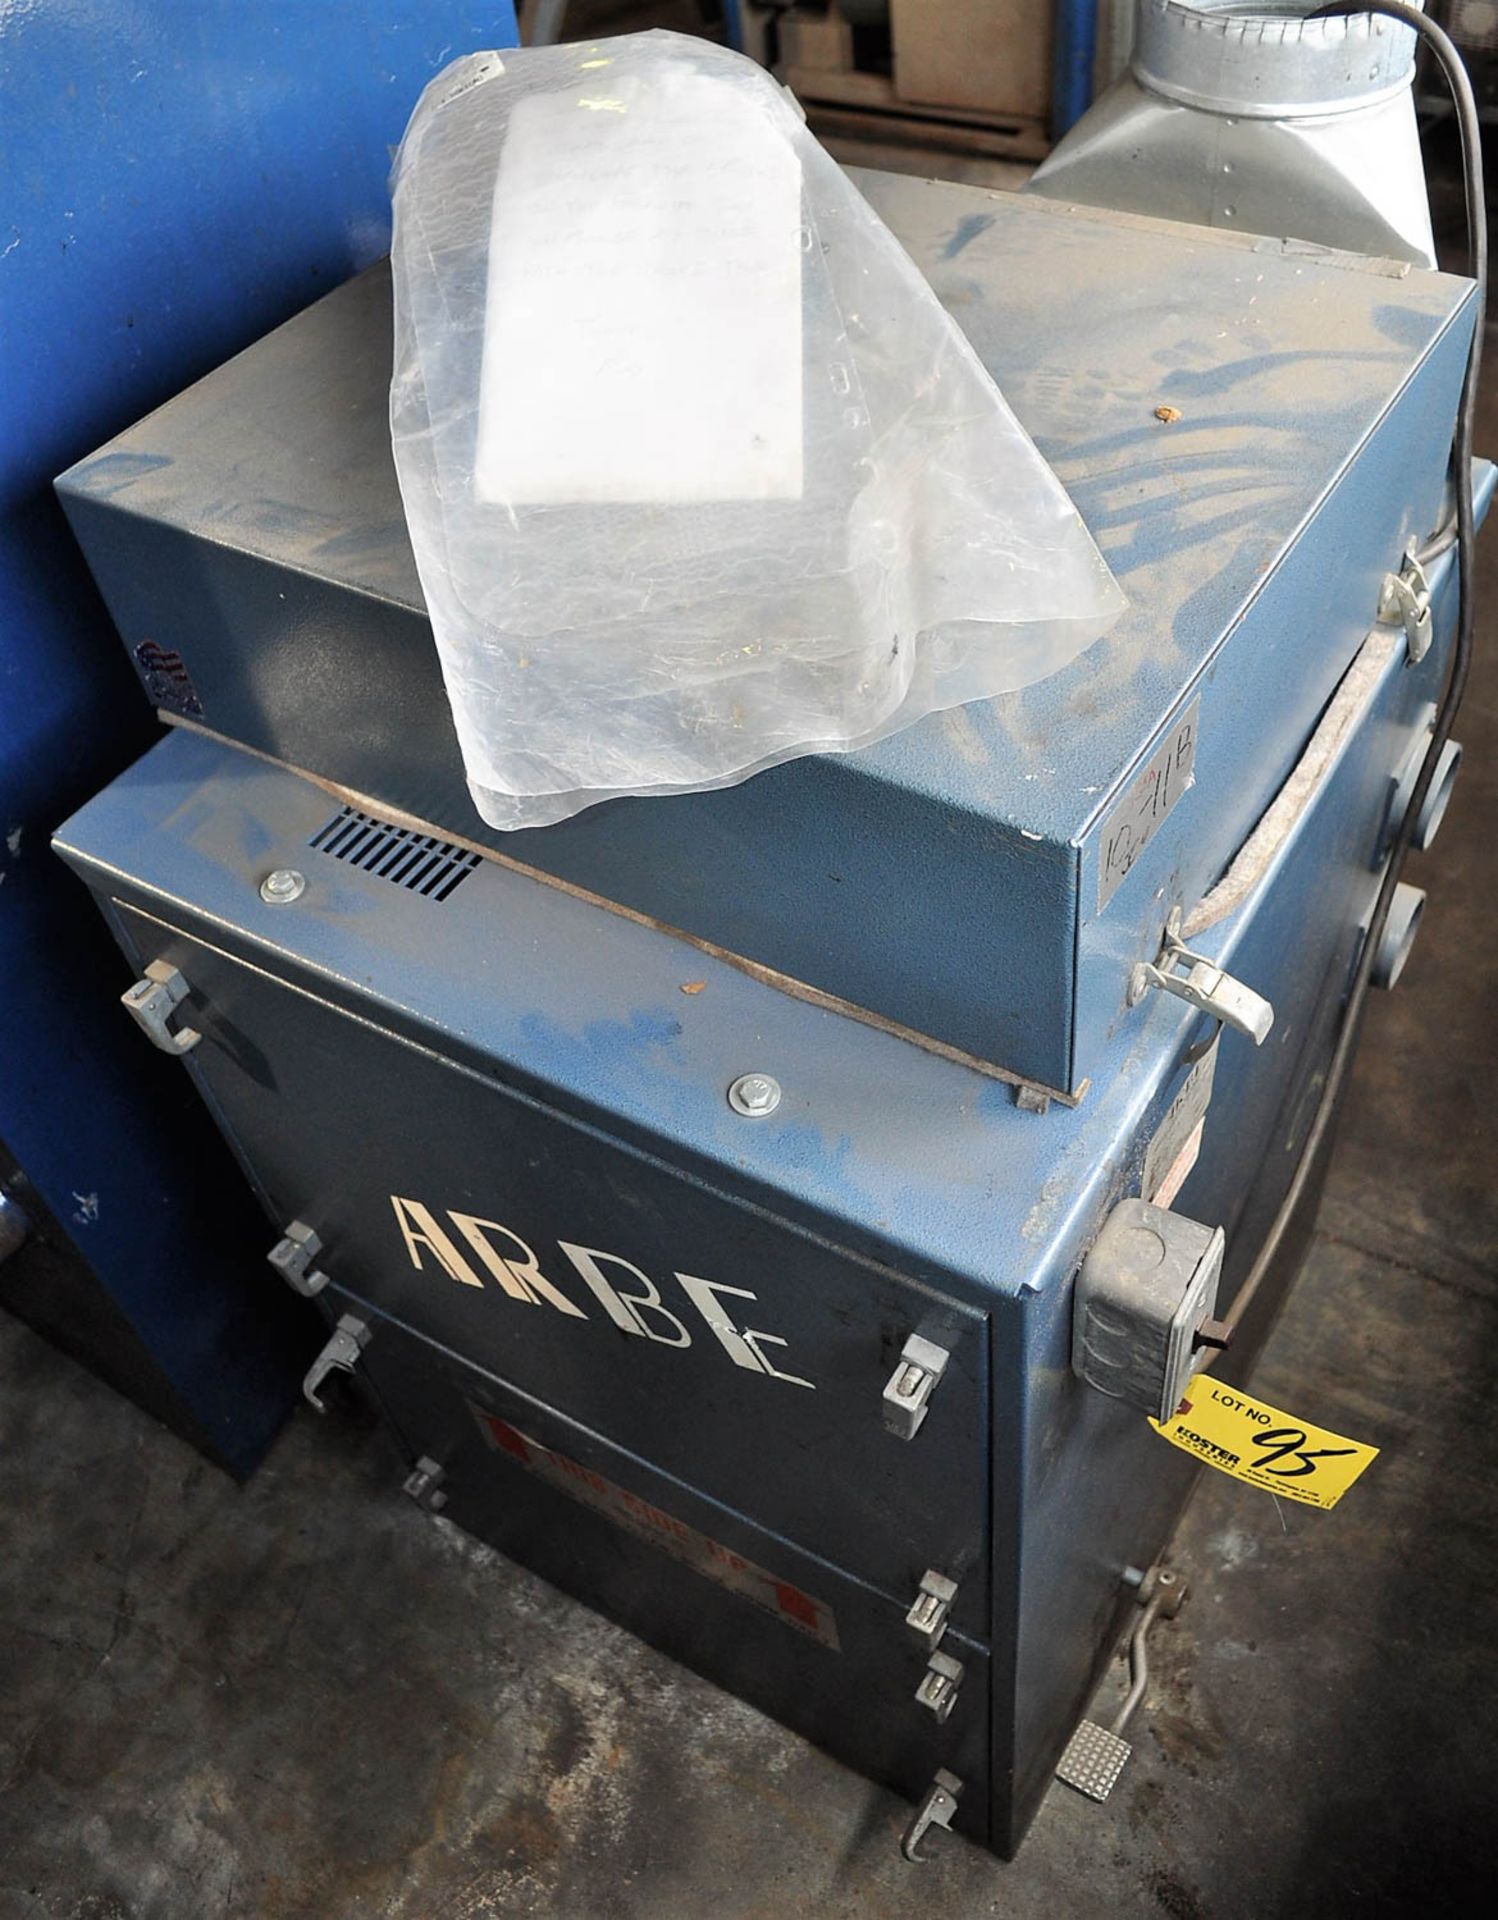 ARBE MDL. 2 DUST COLLECTOR, S/N: 0062599/01 [LOCATED IN ROANOKE, VA]